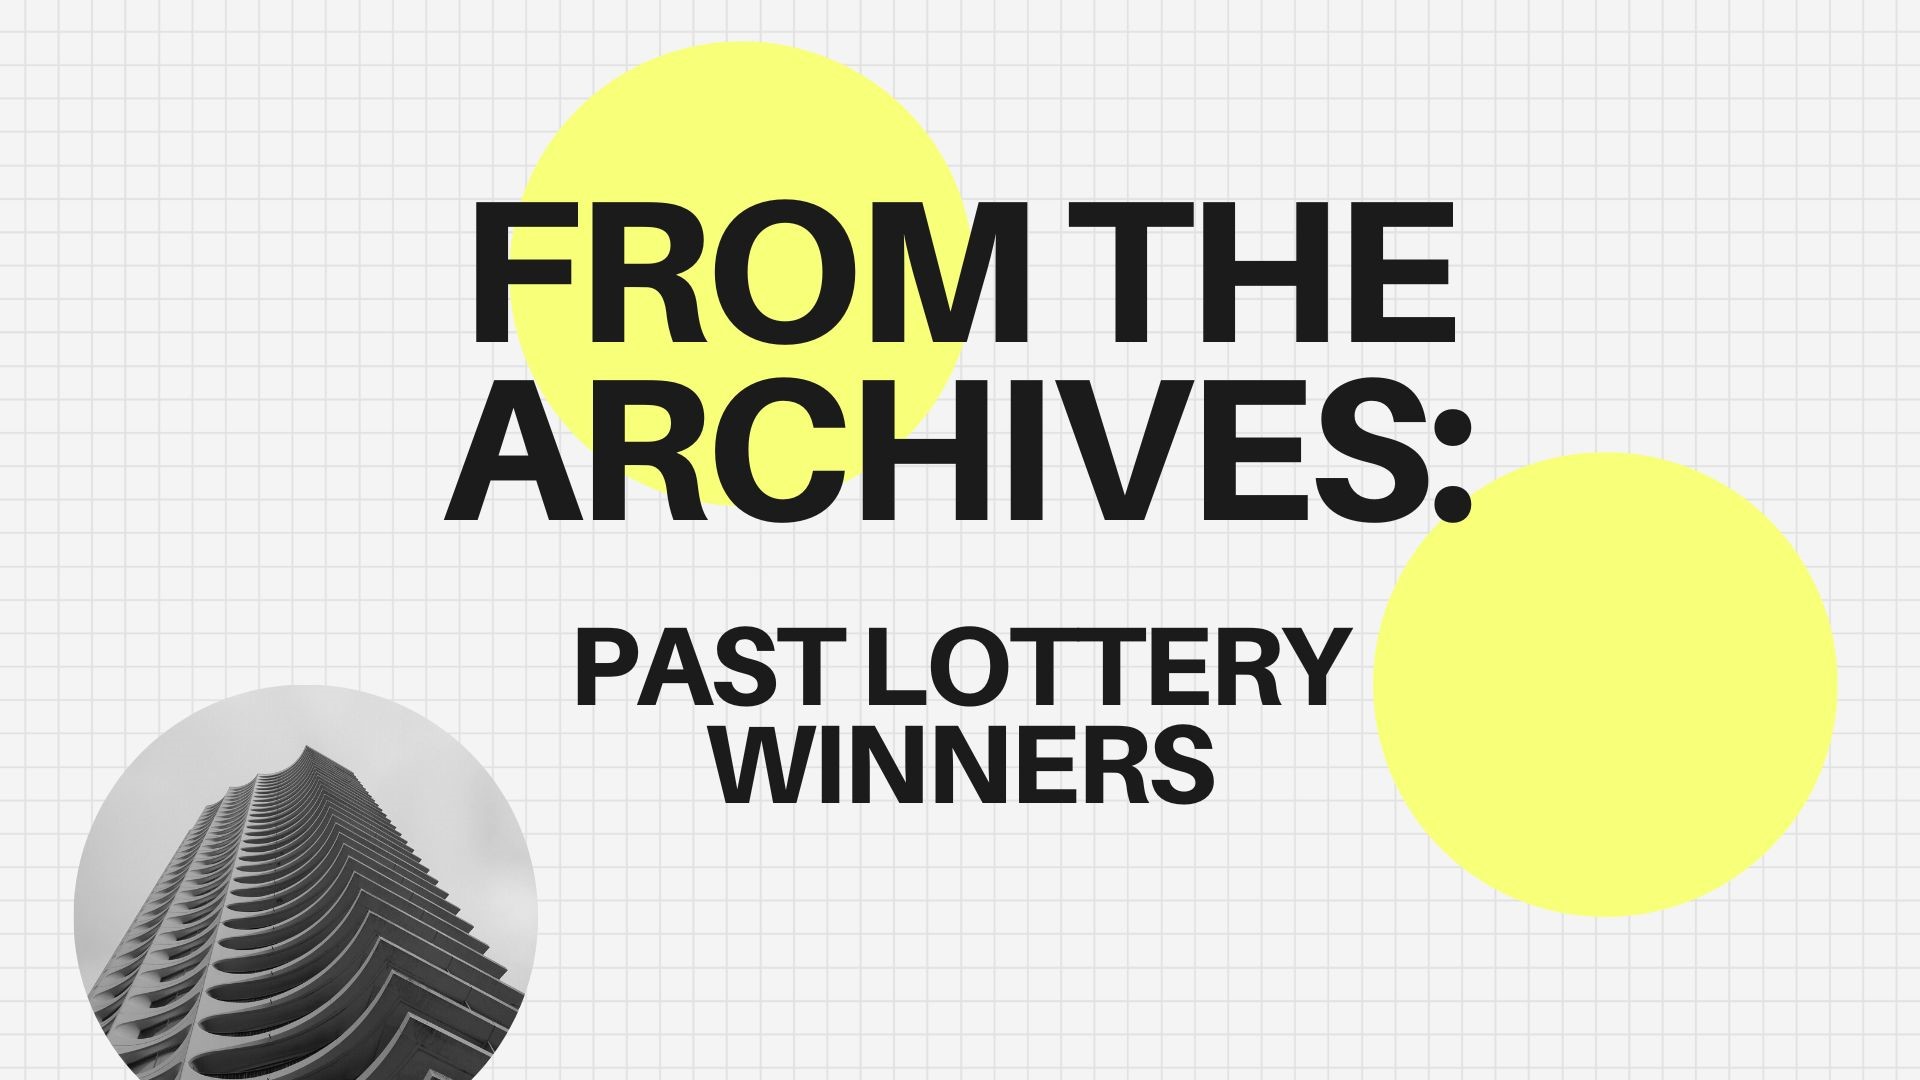 A look back at some of the past lottery winners over the years, from how they won to their experiences after getting the money.